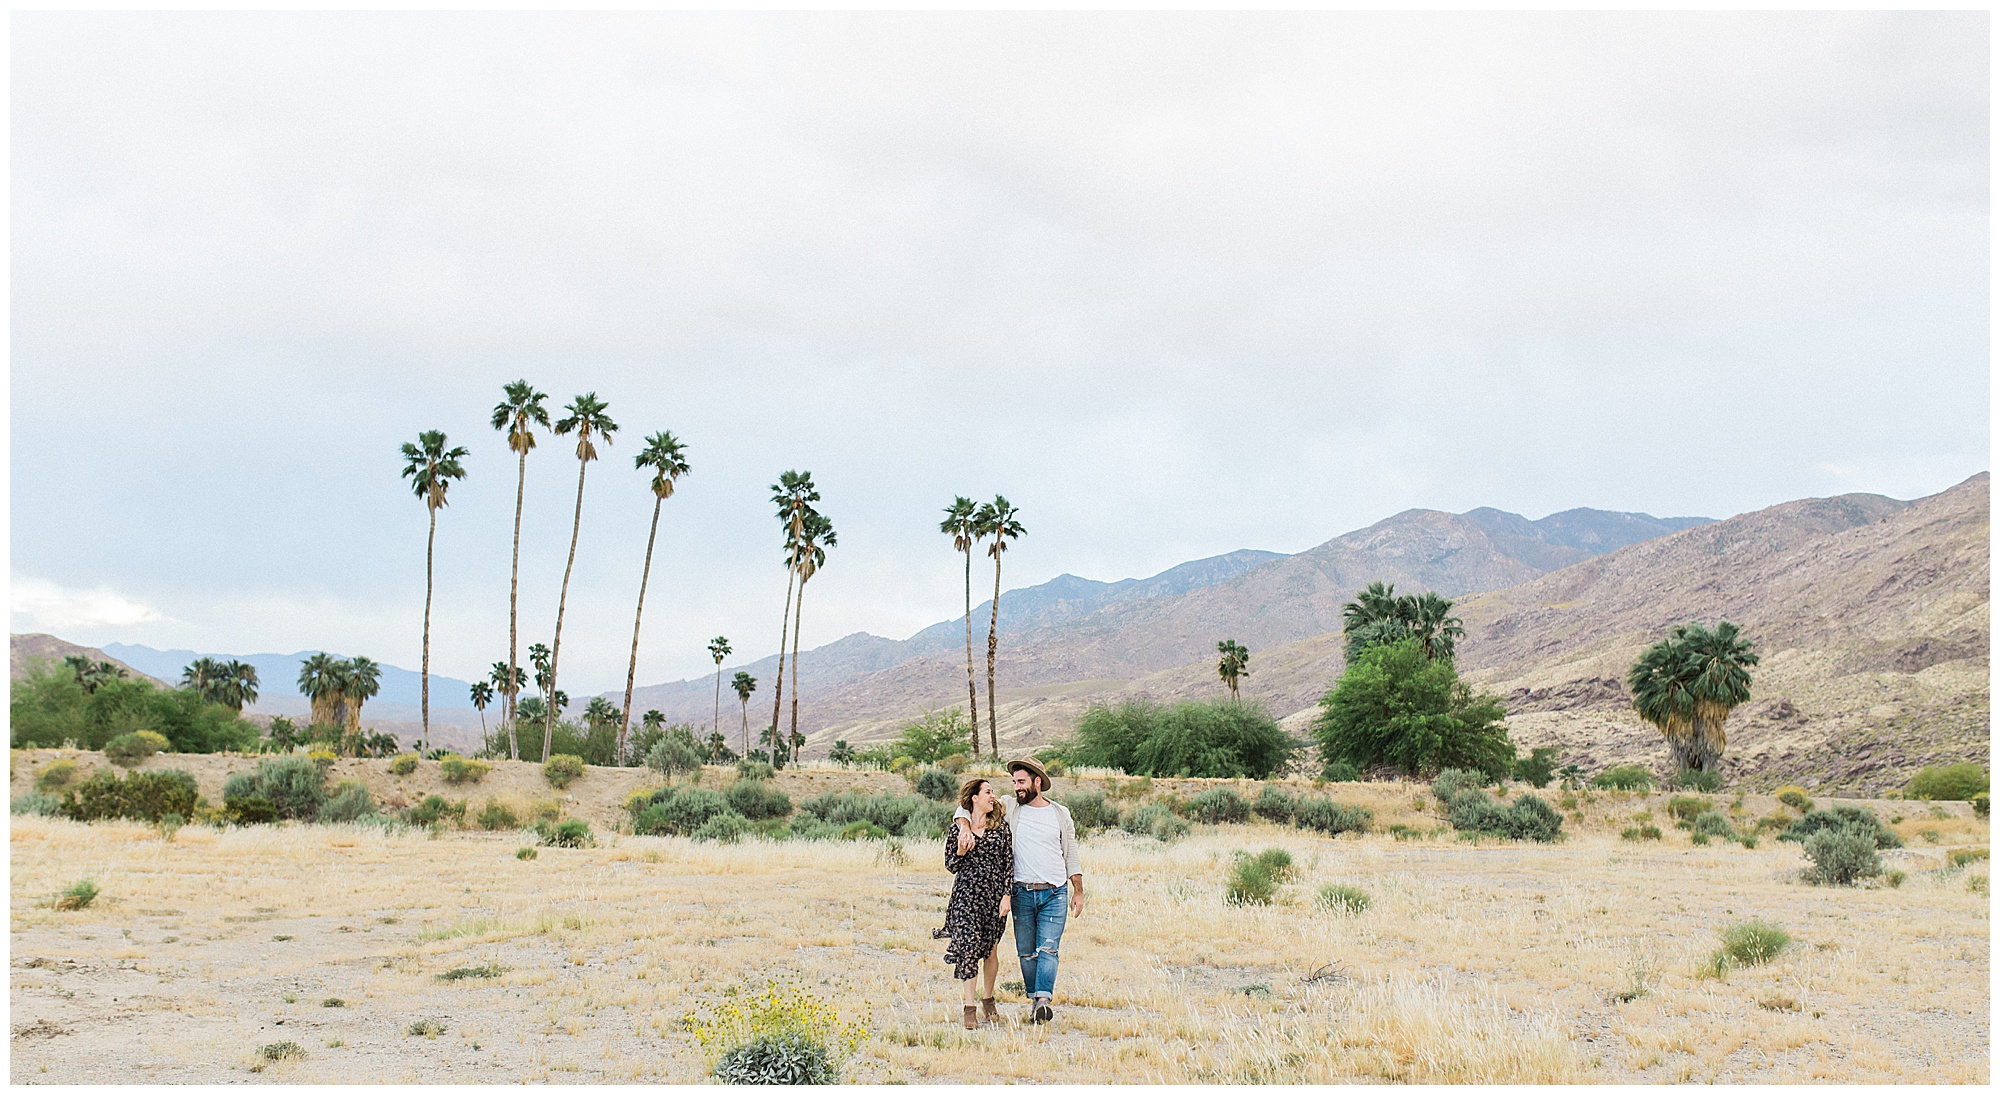 Palm Springs engagement photography. Palm springs photographer, La quinta wedding photographer, desert engagement photos, how to plan a desert photoshoot, coachella photographer, palm springs wedding photographer, palm springs vibes, desert wedding photos, saguaro wedding photographer, palm desert wedding photos, palm desert engagement photos, ace hotel photographer, joshua tree engagement photos, windmill engagement photos, what to wear for your desert engagement photos